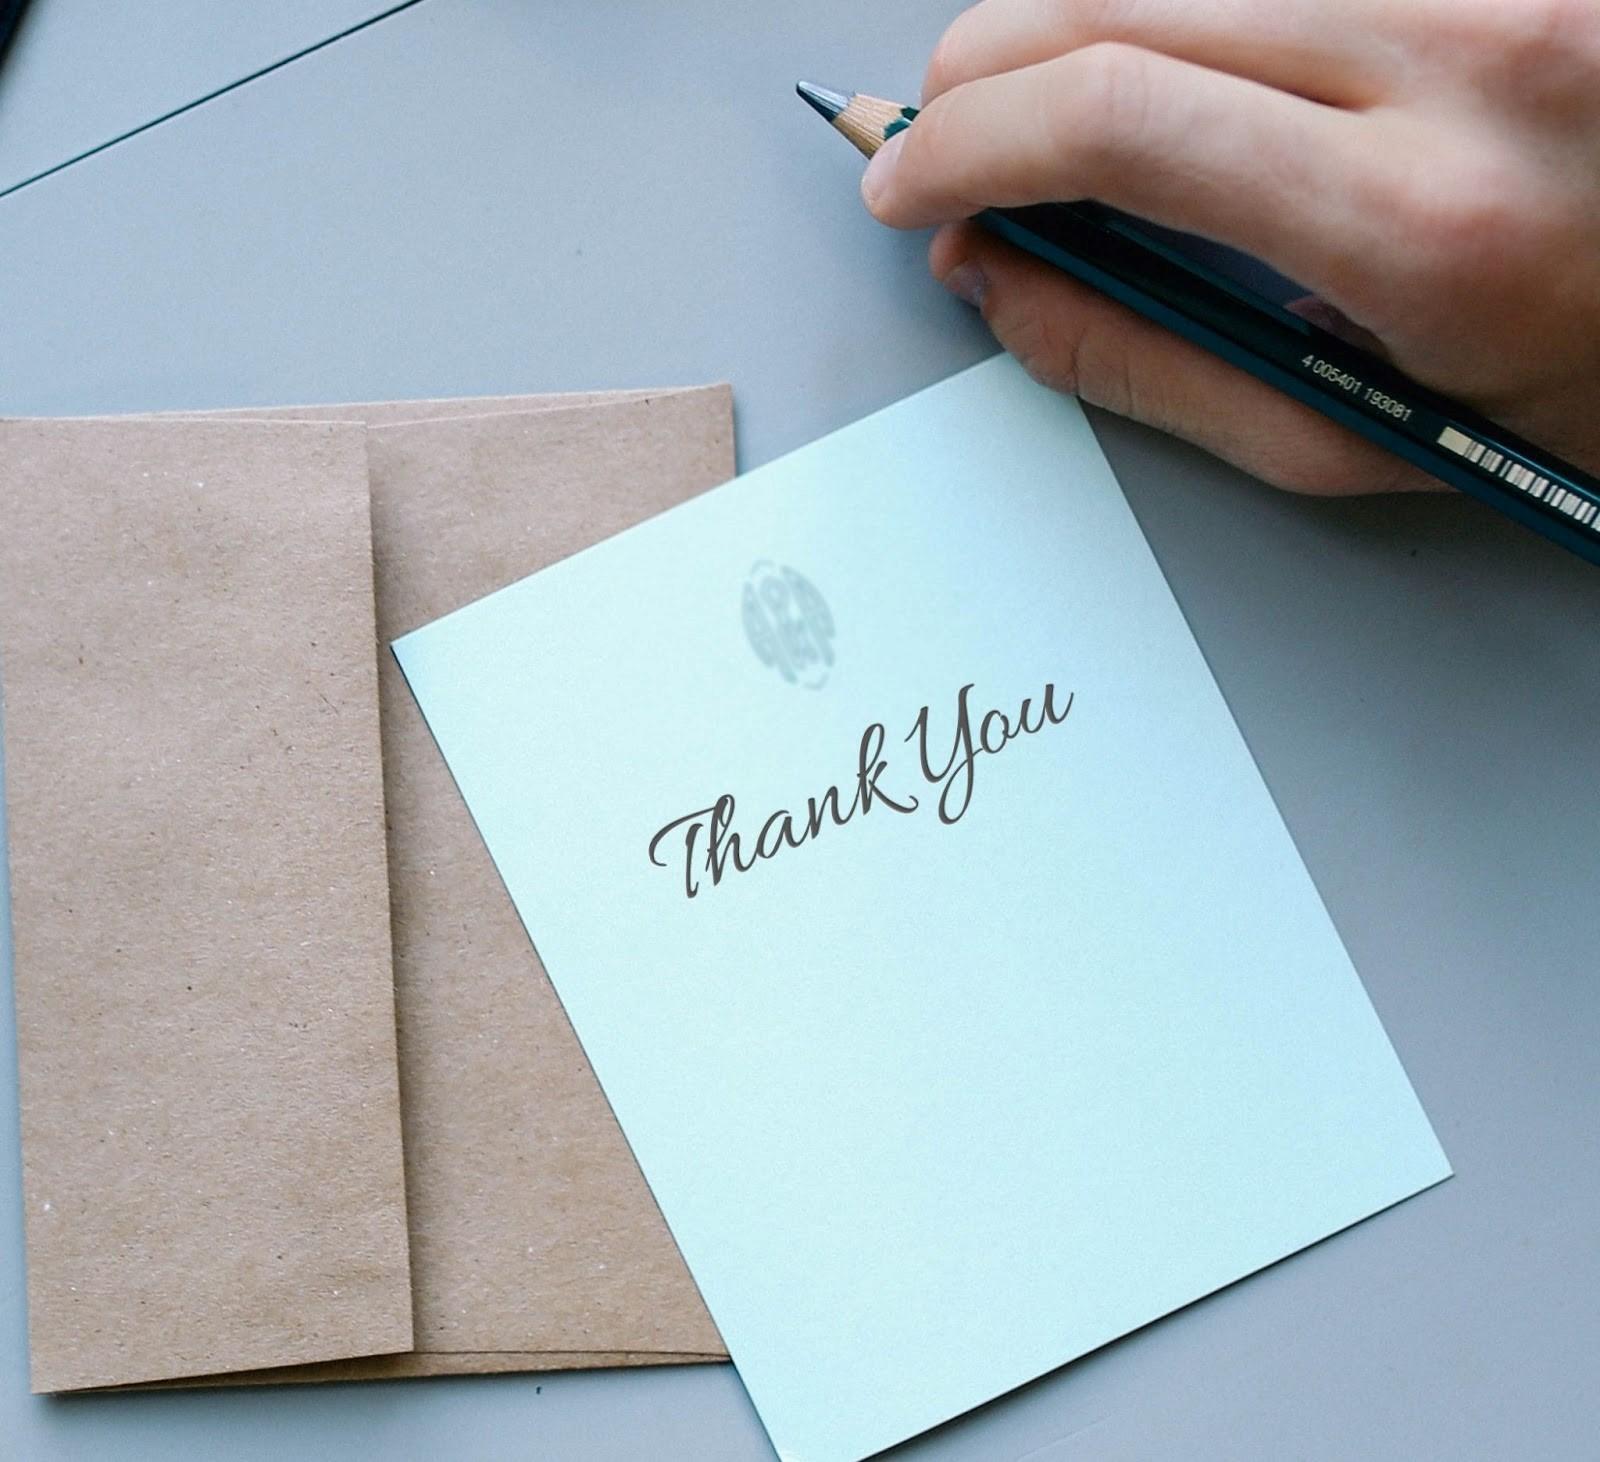 IMPORTANCE OF SENDING HANDWRITTEN THANK YOU NOTE TO POTENTIAL SUPPORTERS
